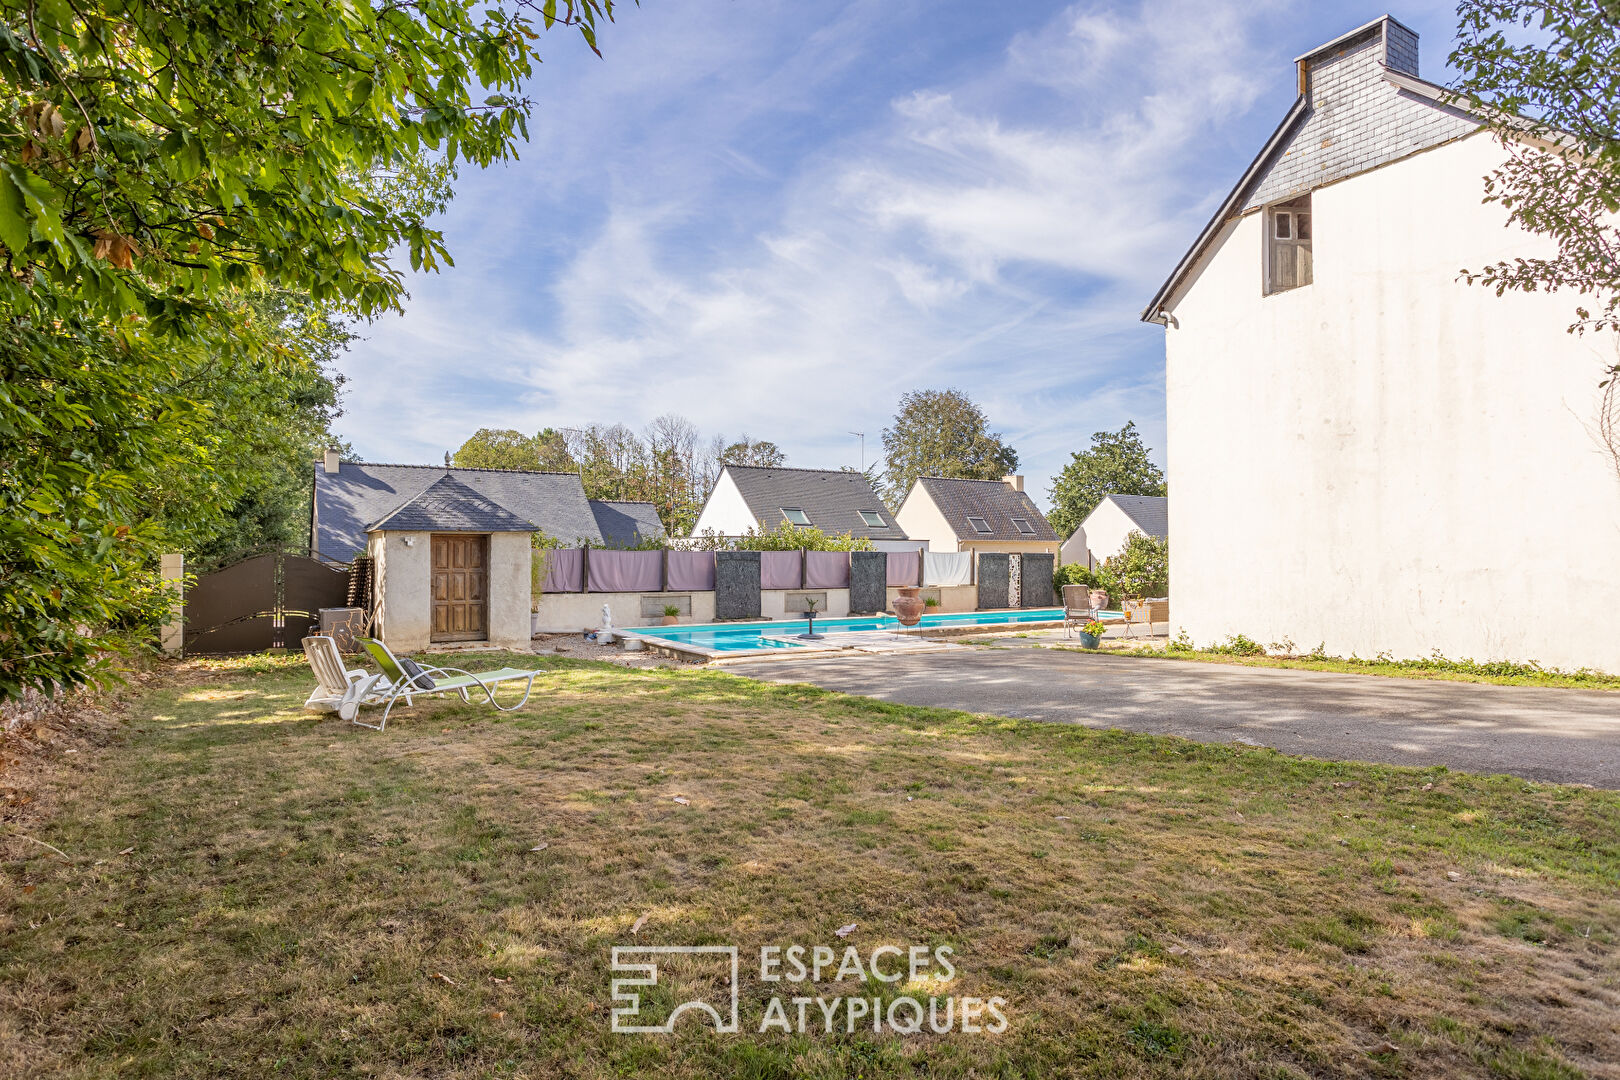 Bright stone farmhouse with swimming pool